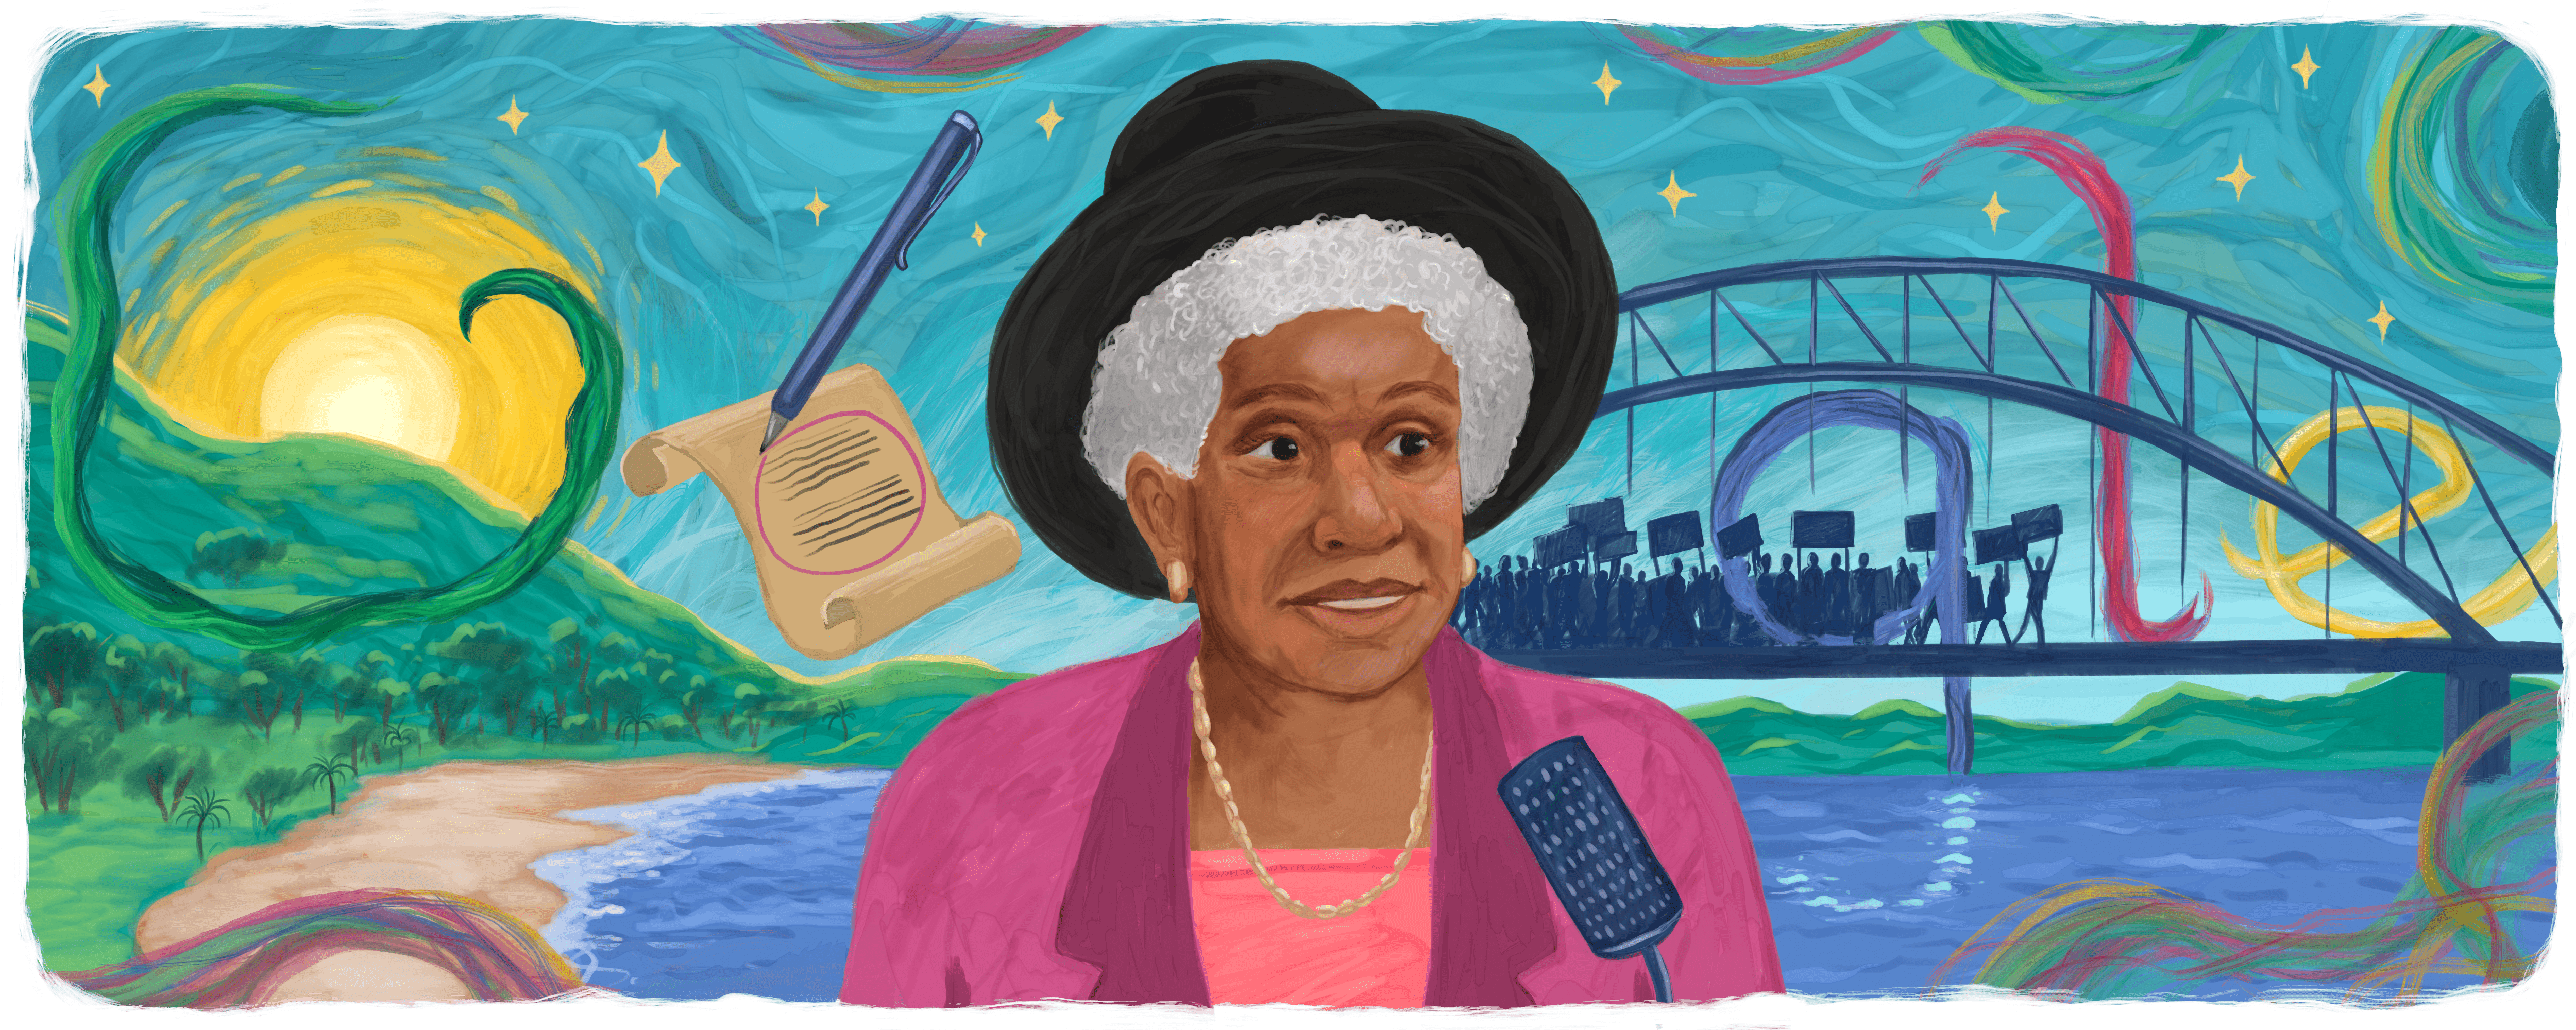 Illustration of Evelyn Ruth Scott AO standing in front of a microphone with a nature scene behind her. Evelyn has brown skin, short, gray hair, and is wearing a black hat, pink blazer, and gold jewelry. The GOOGLE logo is floating behind her abstractly incorporated into the nature scene with the first O represented by a paper and pen and the second O represented by Evelyn's head. The background is comprised of a grassy hill, the sun, and body of water with a bridge stretching over carrying silhouettes of protesters. 